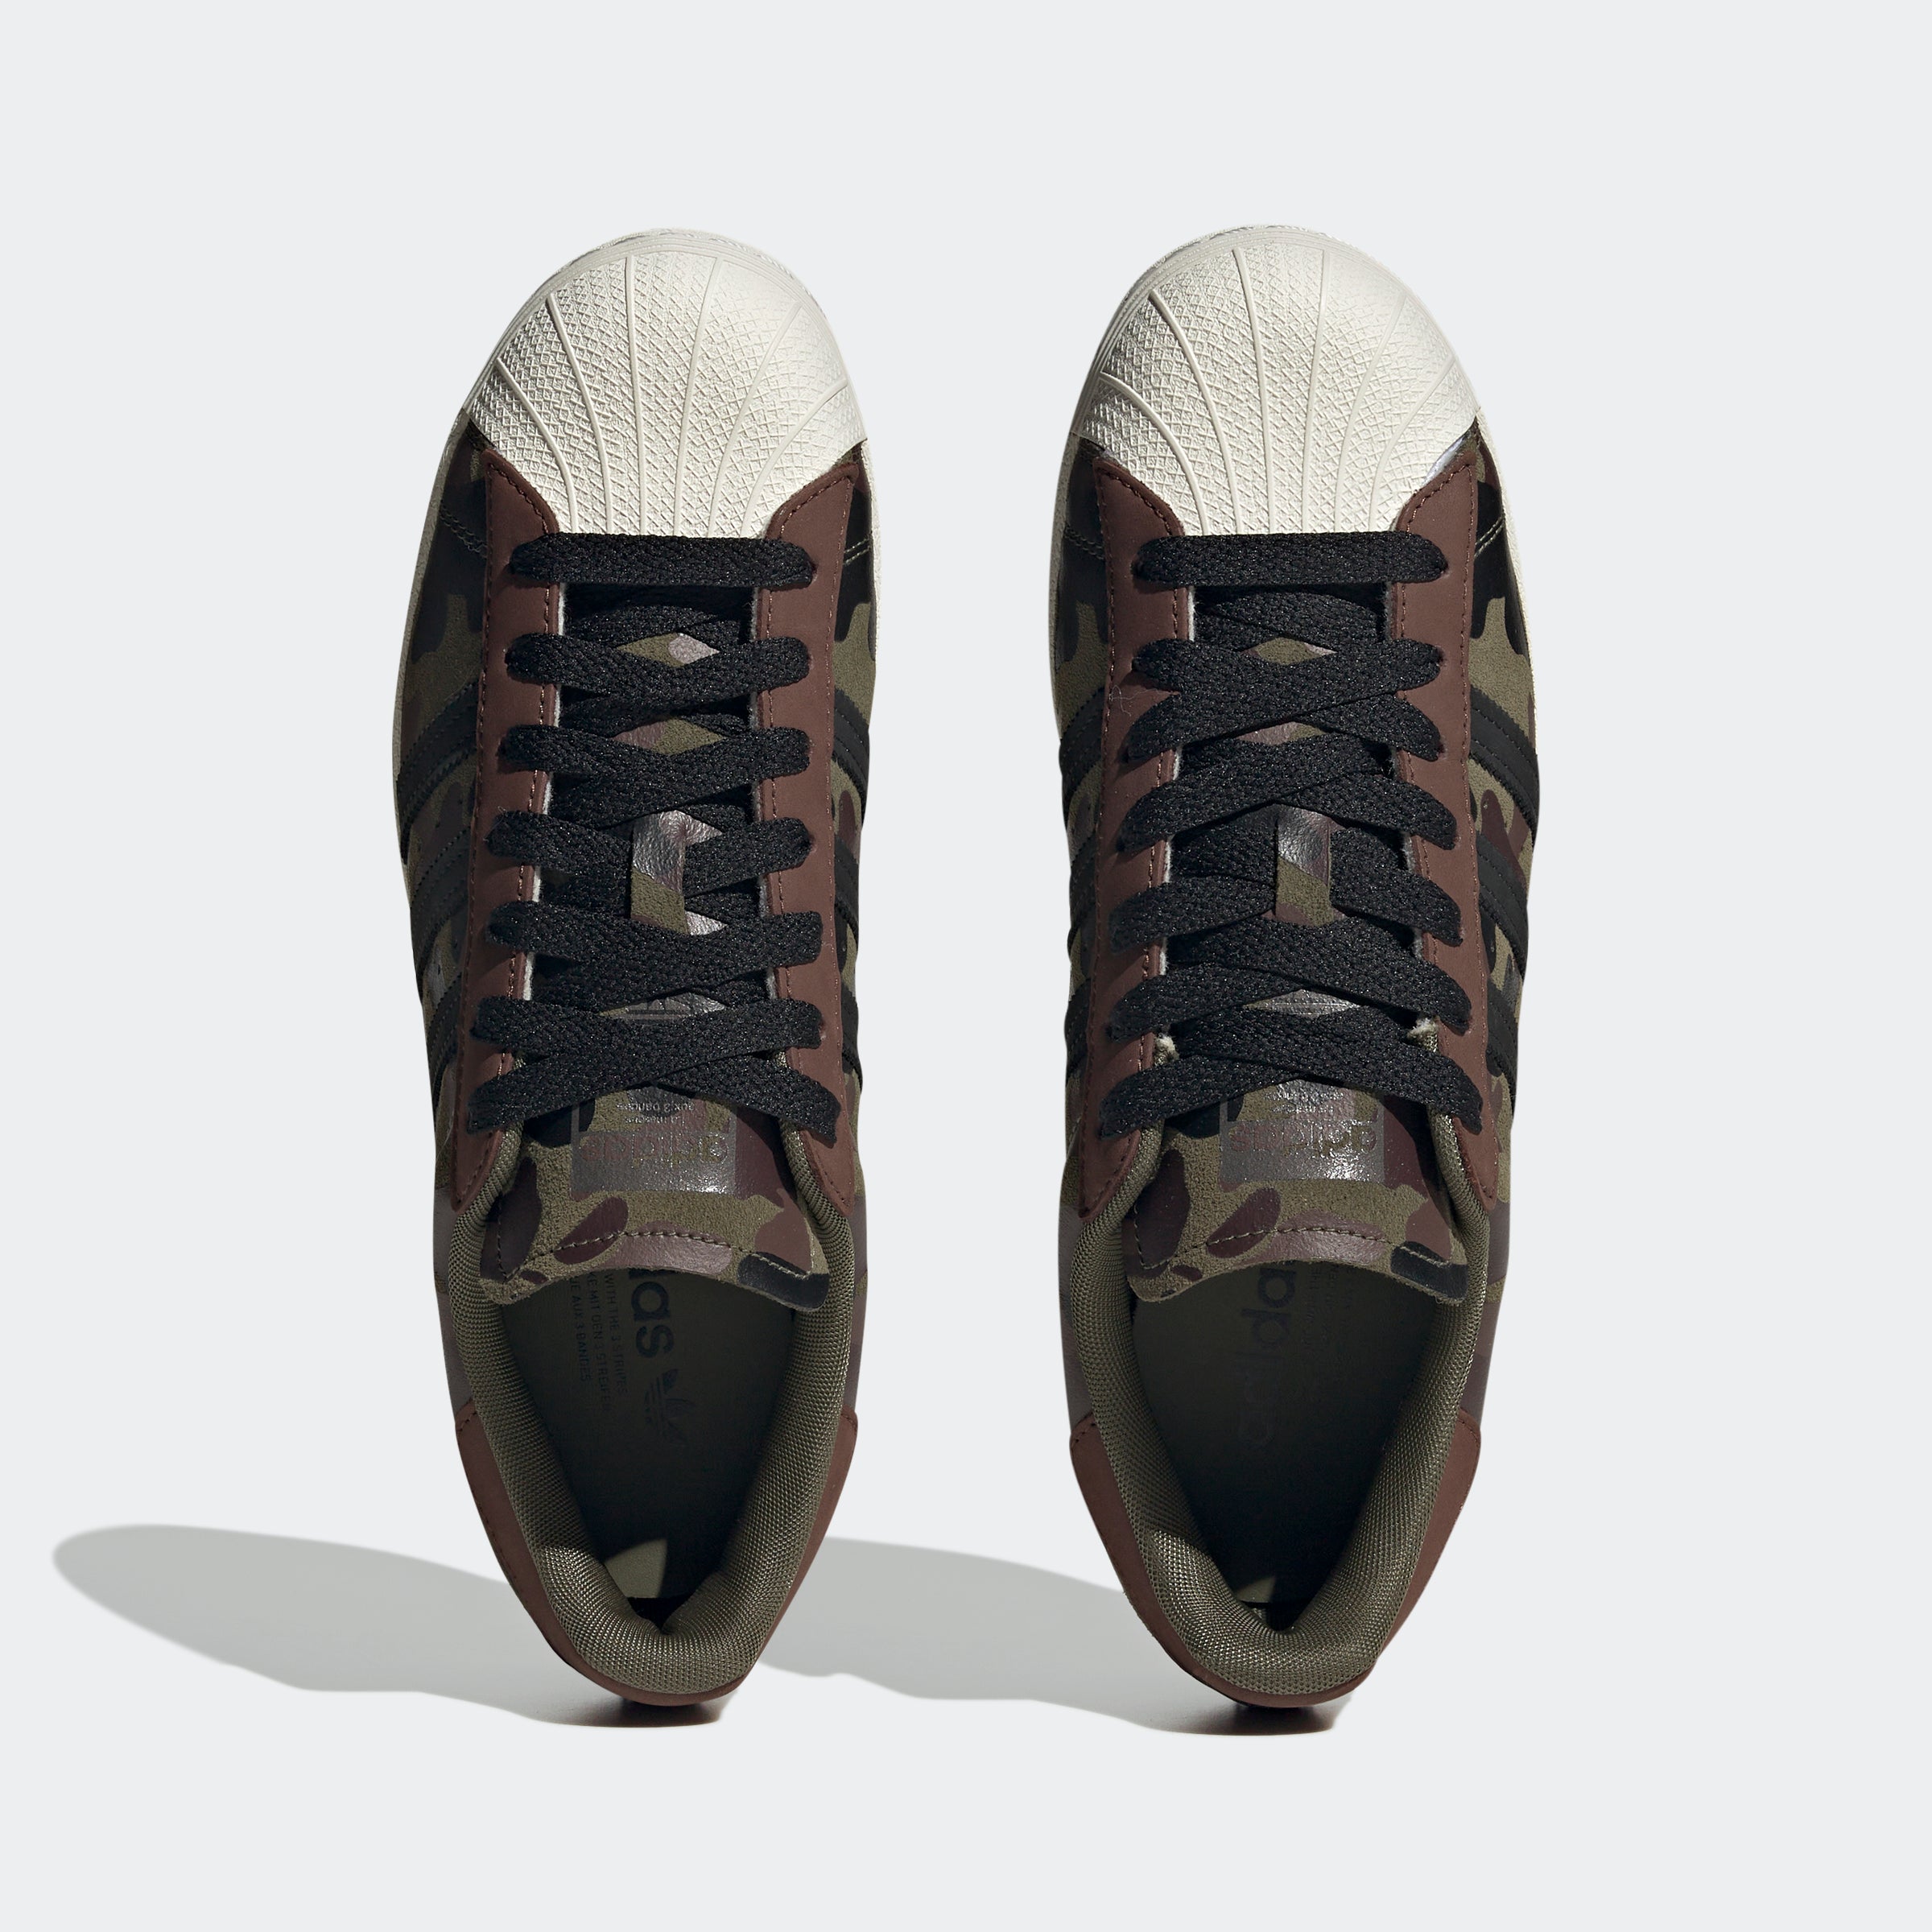 adidas Superstar Shoes Olive Strata Camouflage | City Sports